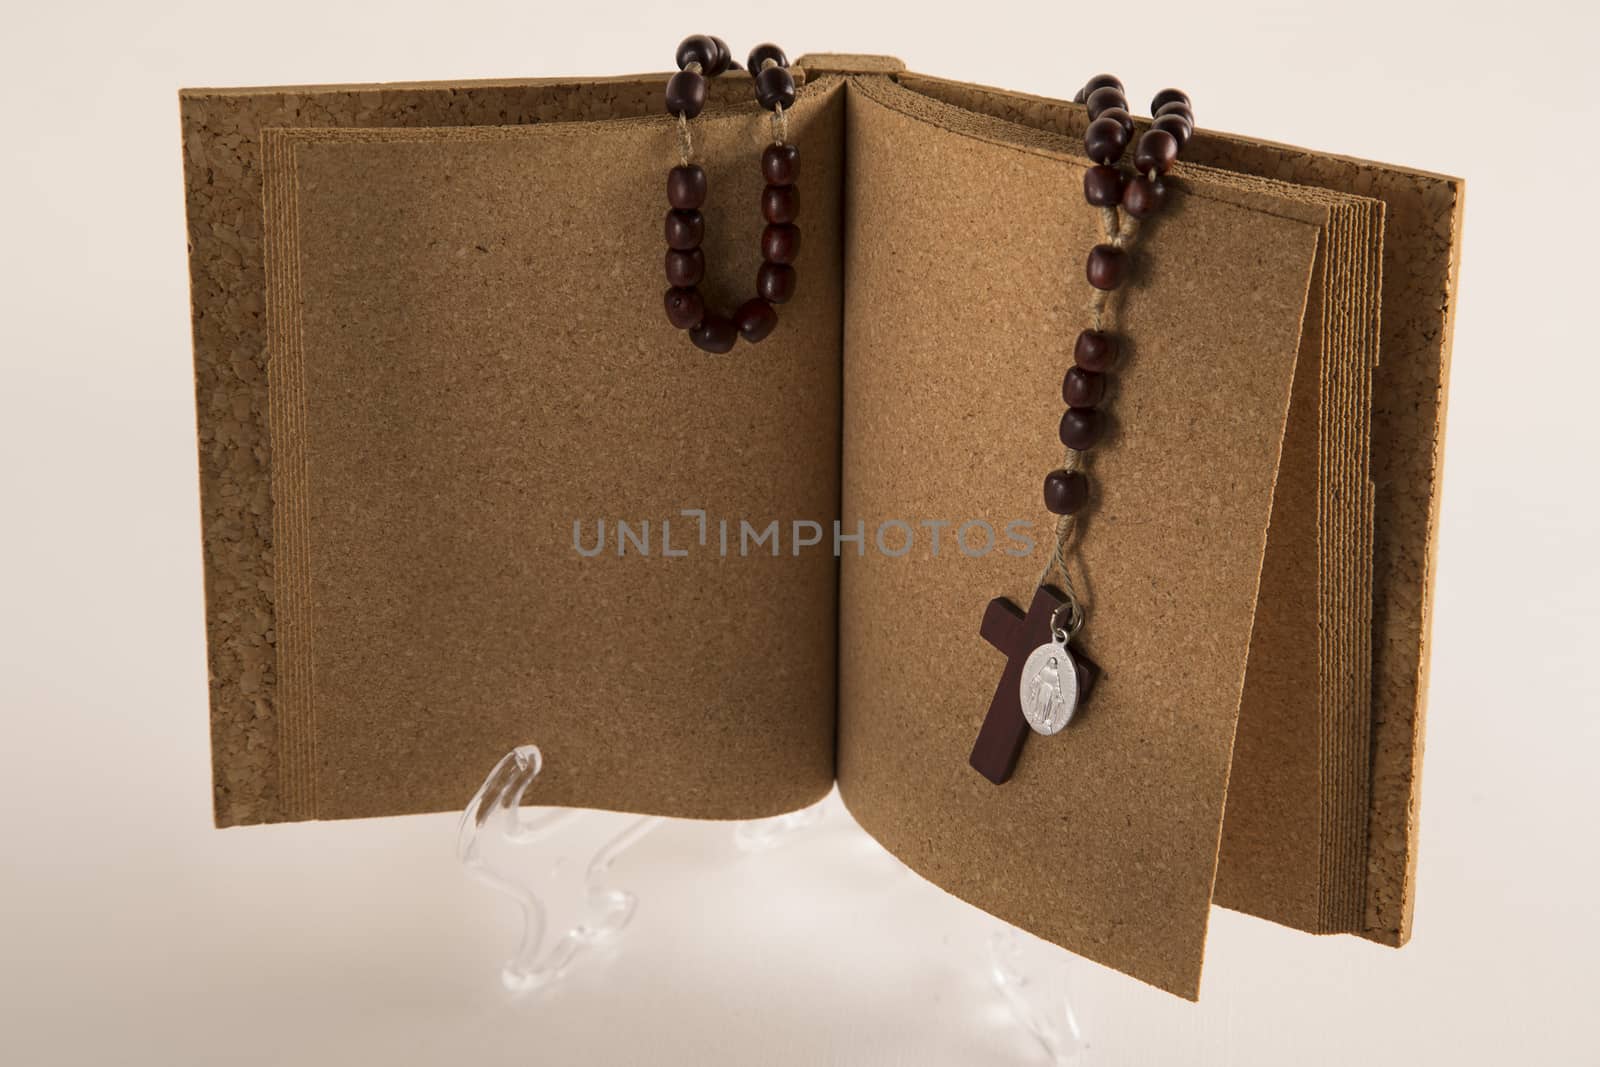 Holy Rosary necklace on cork book by paocasa